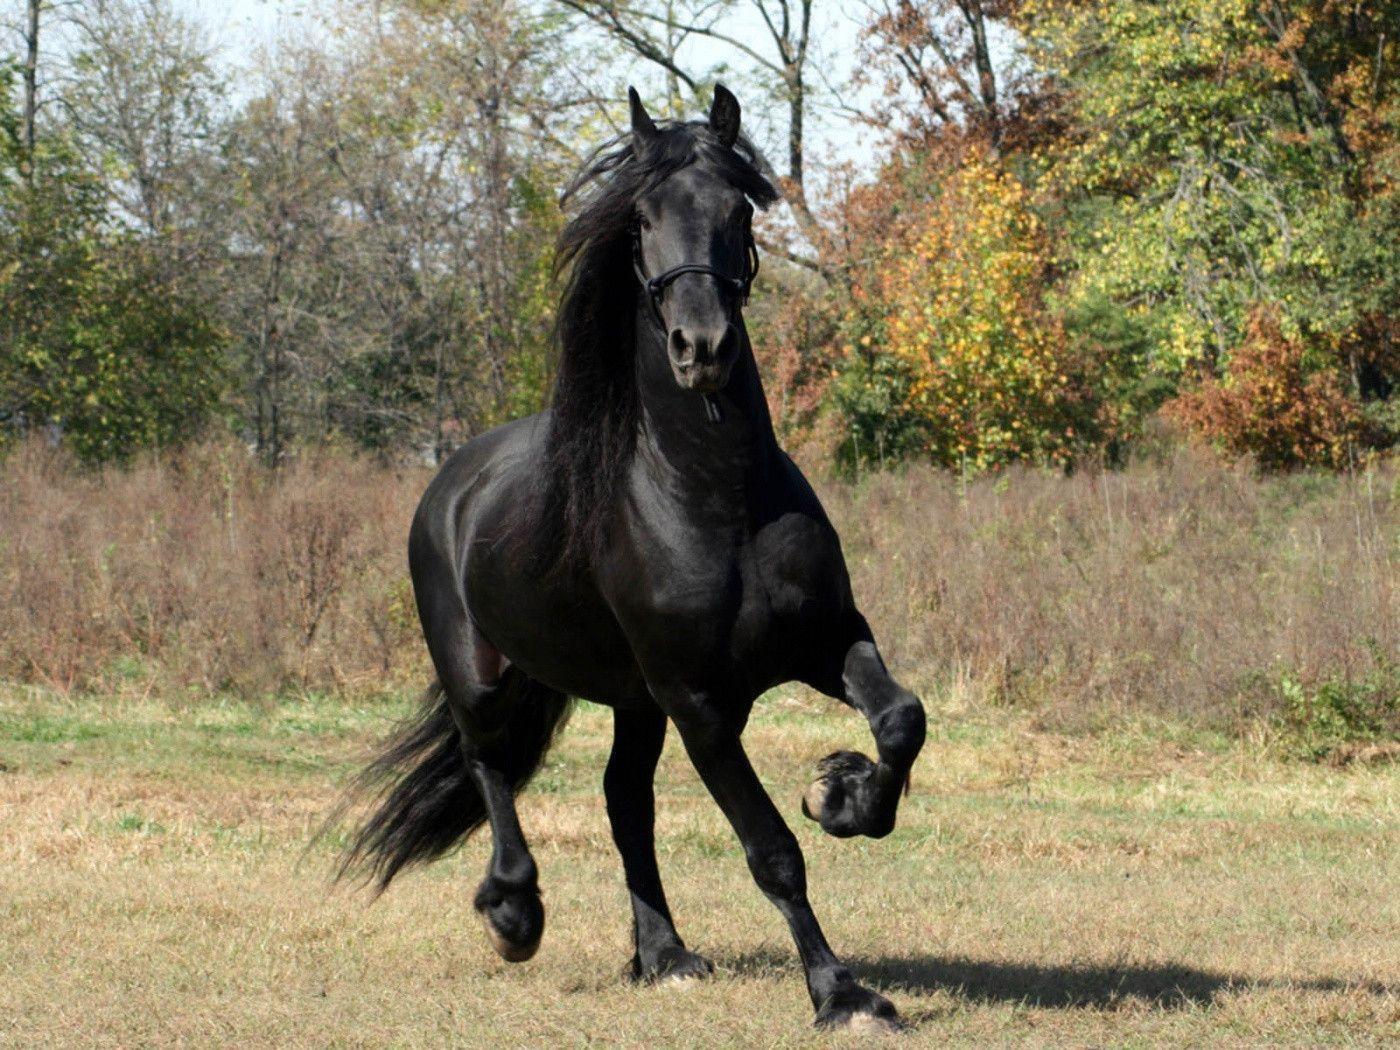 Download A Majestic Black Horse Running Through the Fields | Wallpapers.com